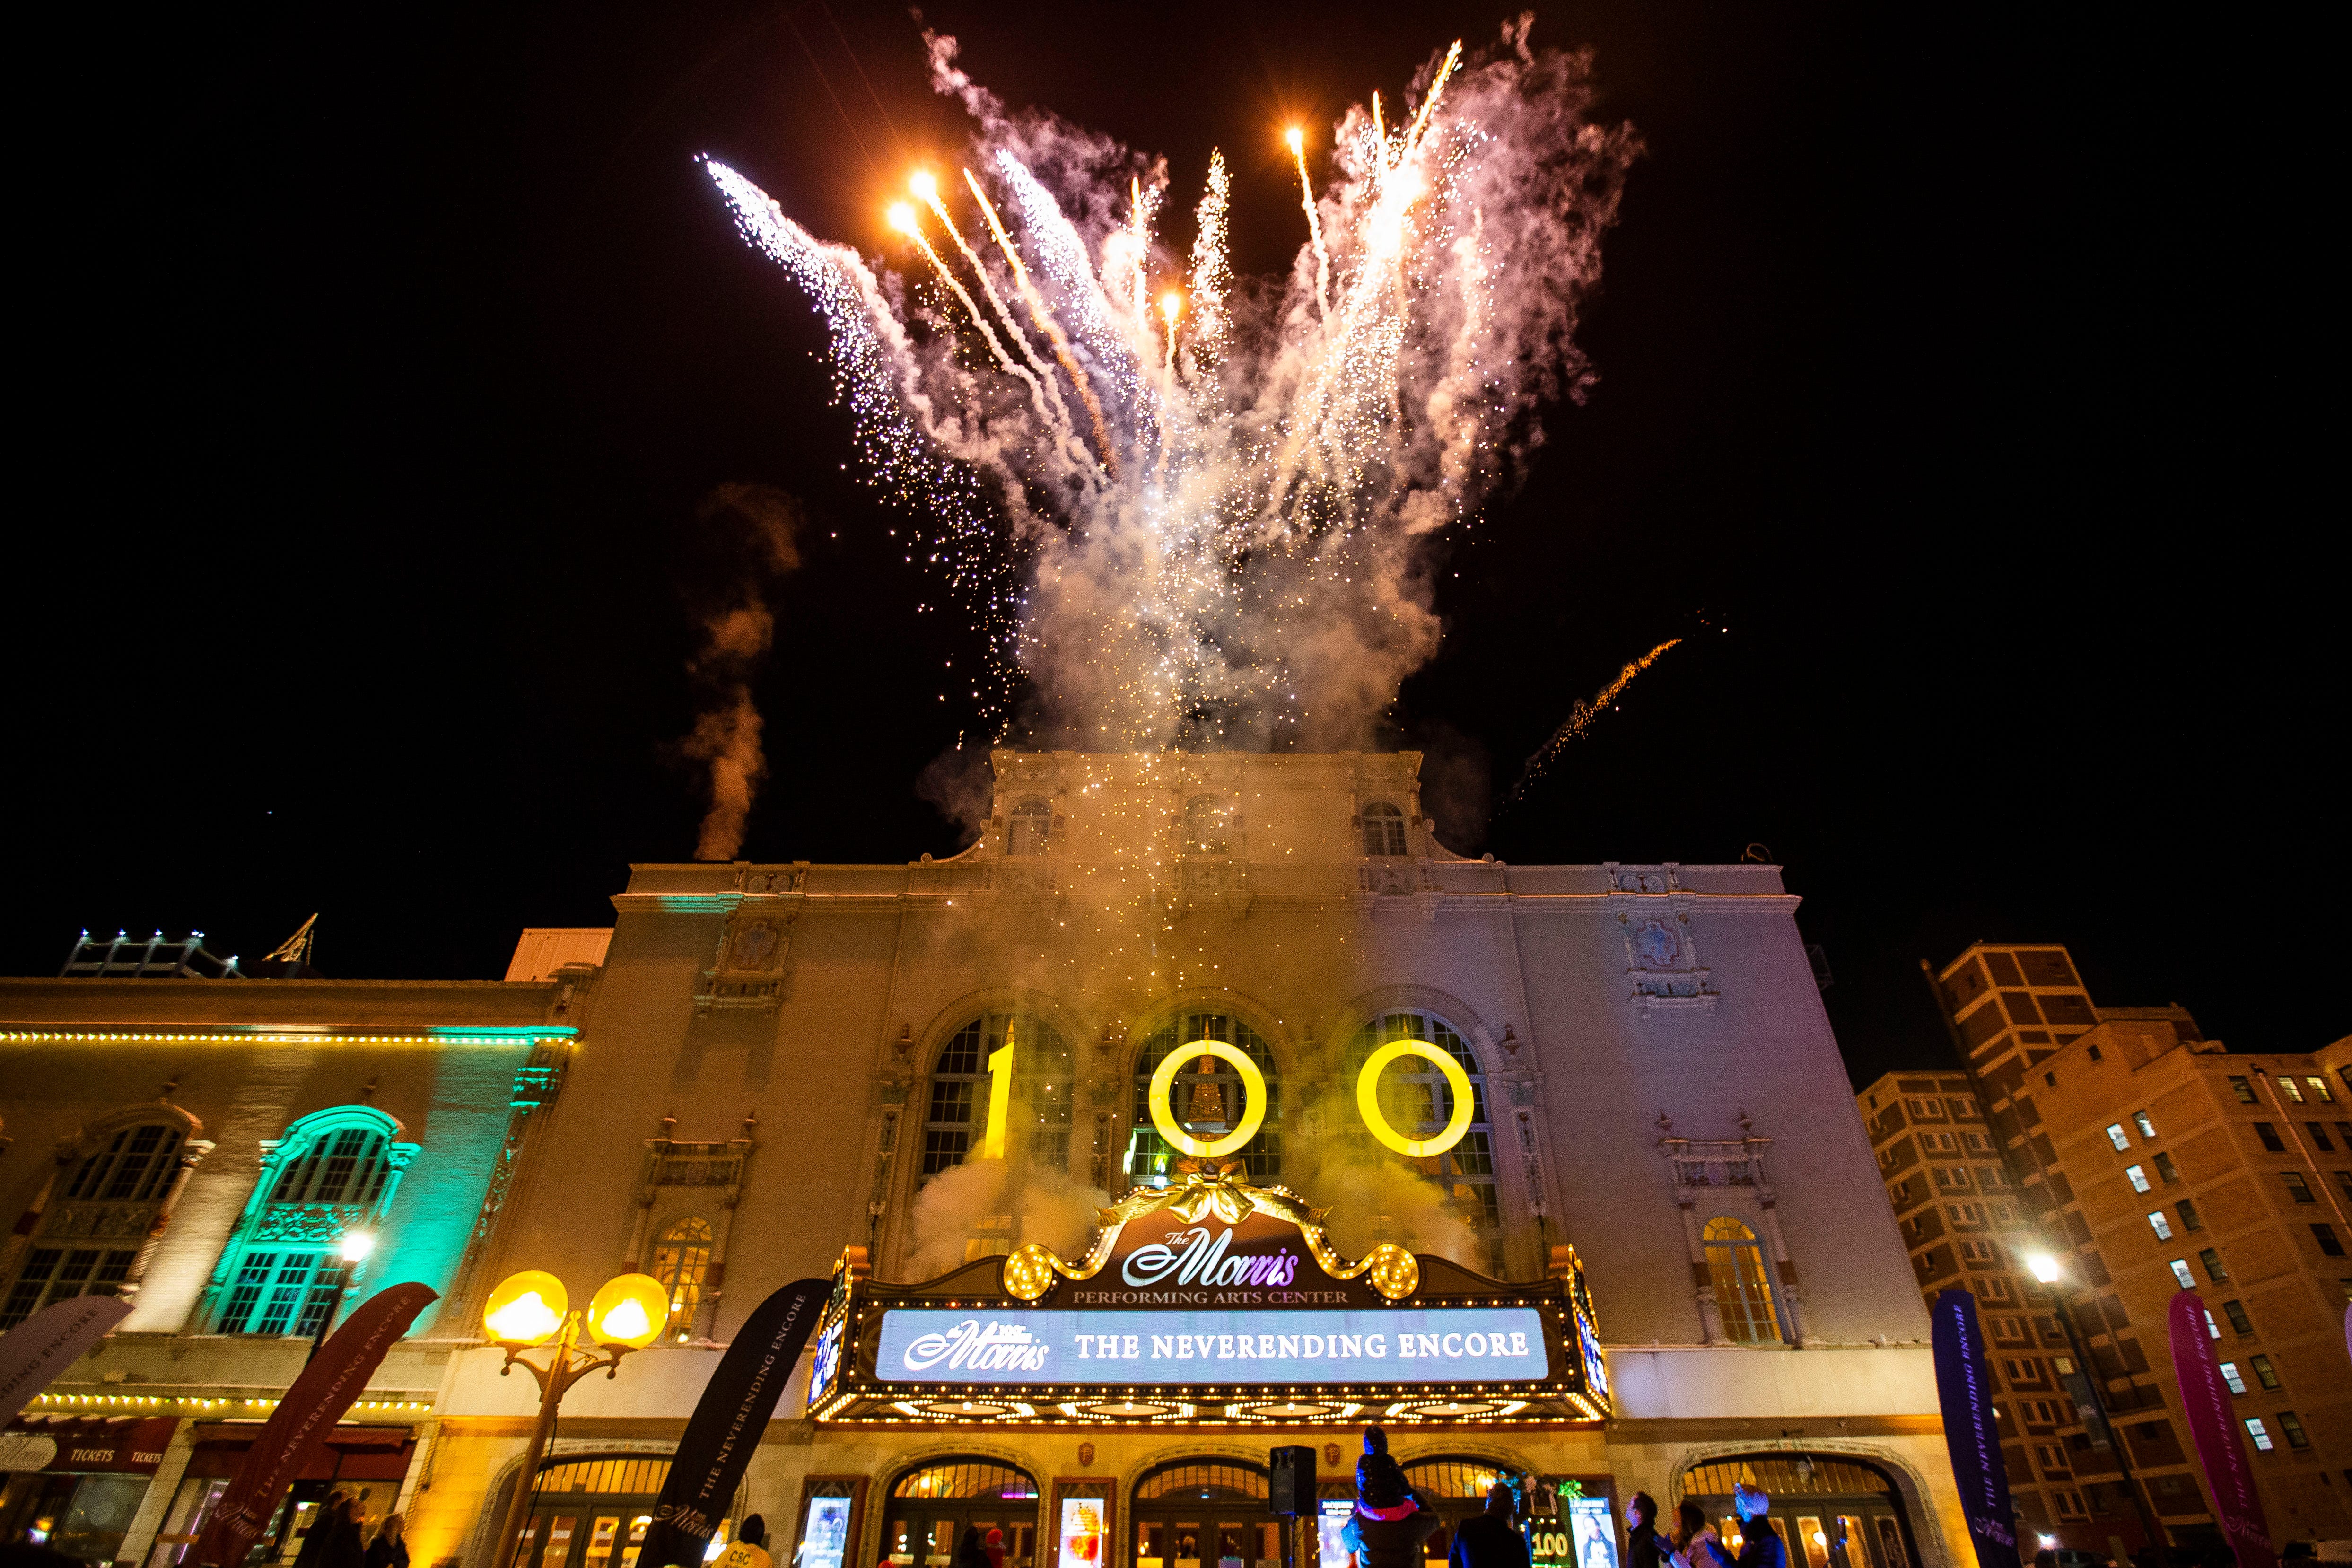 Fireworks are launched to celebrate the 100th anniversary of The Morris Performing Arts Center Friday, Jan. 7, 2021 in South Bend.